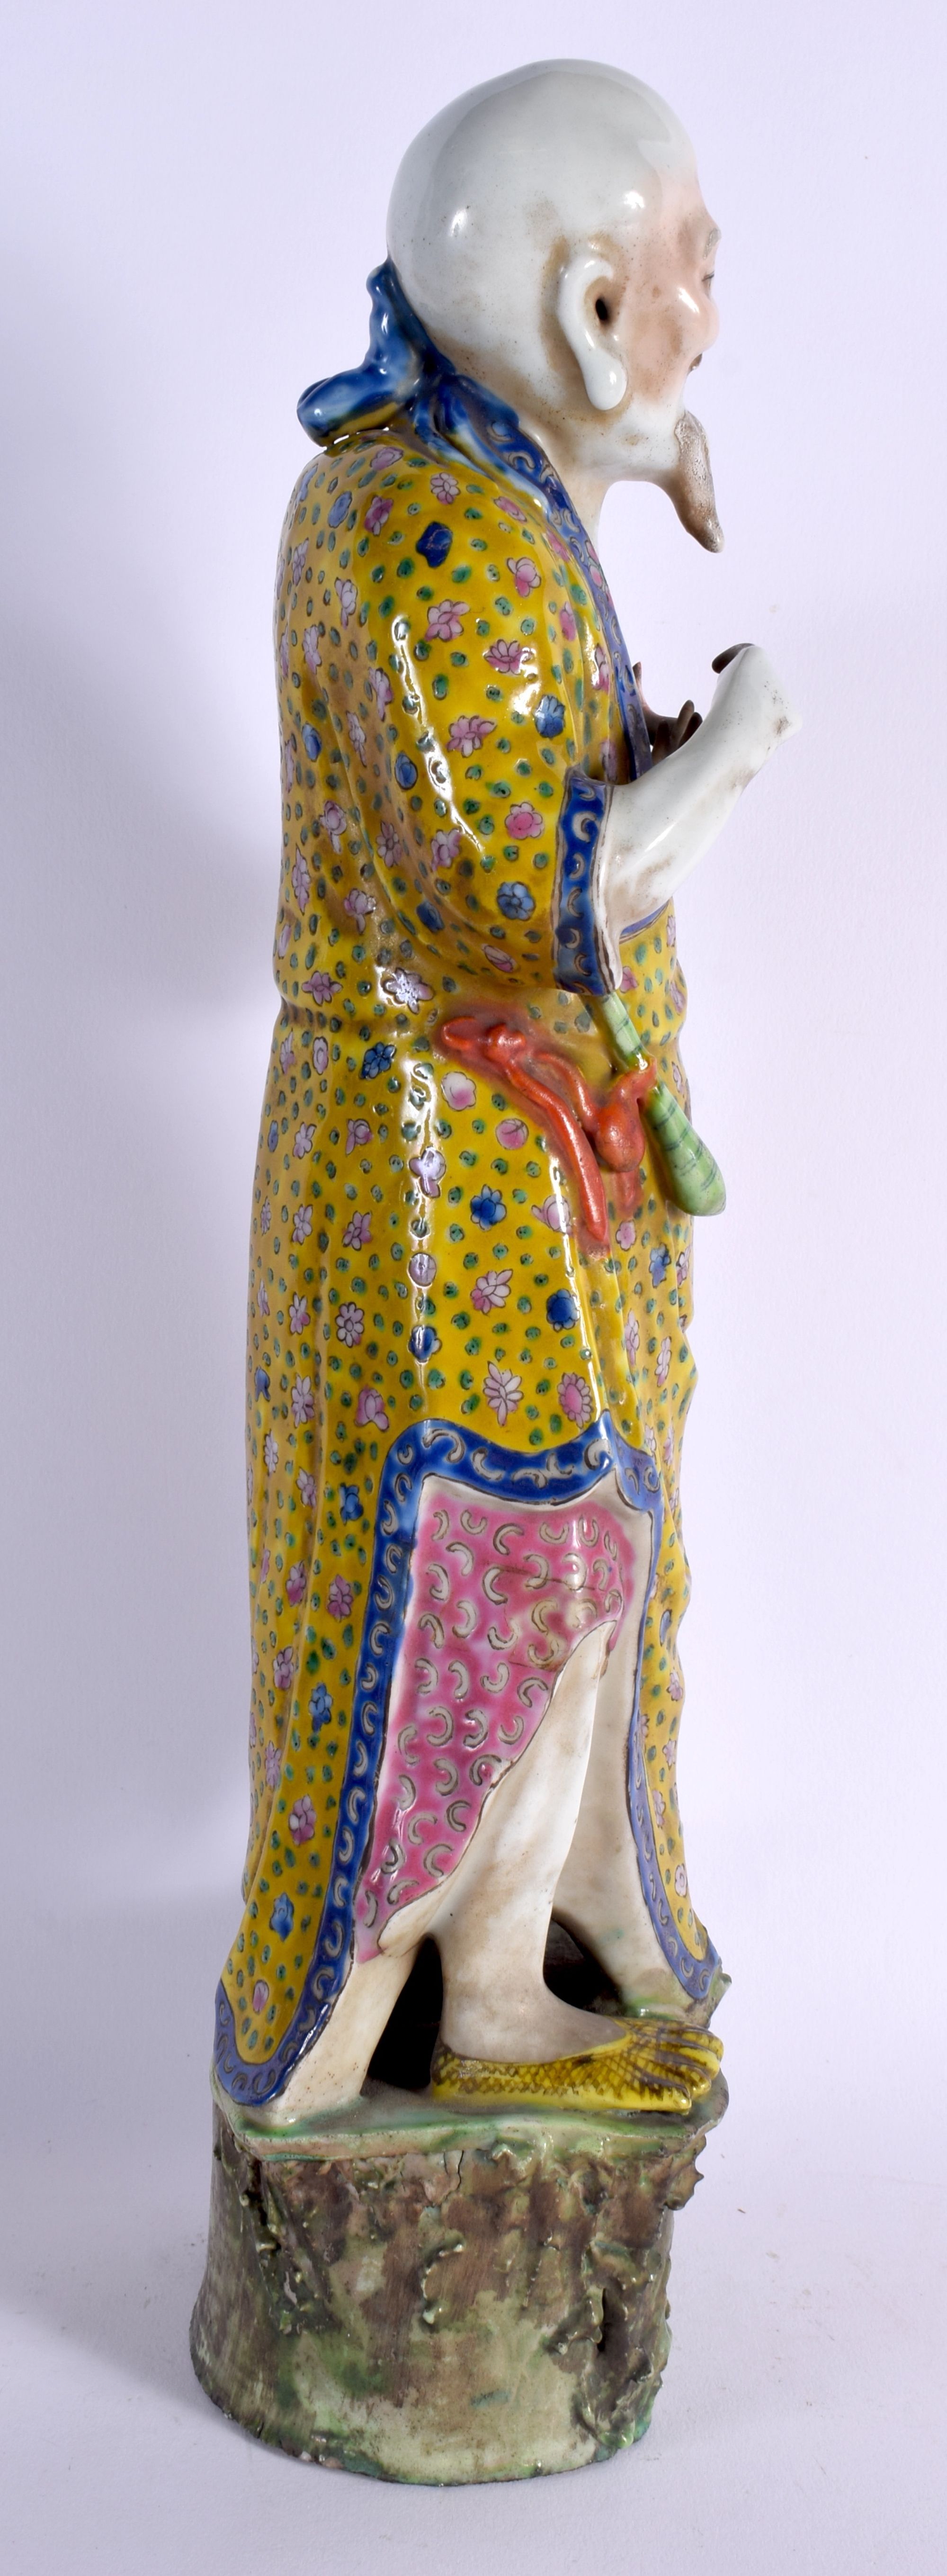 A LARGE CHINESE REPUBLICAN PERIOD PORCELAIN FIGURE OF A FISHERMAN modelled holding a fish. 42.5 cm h - Image 4 of 6